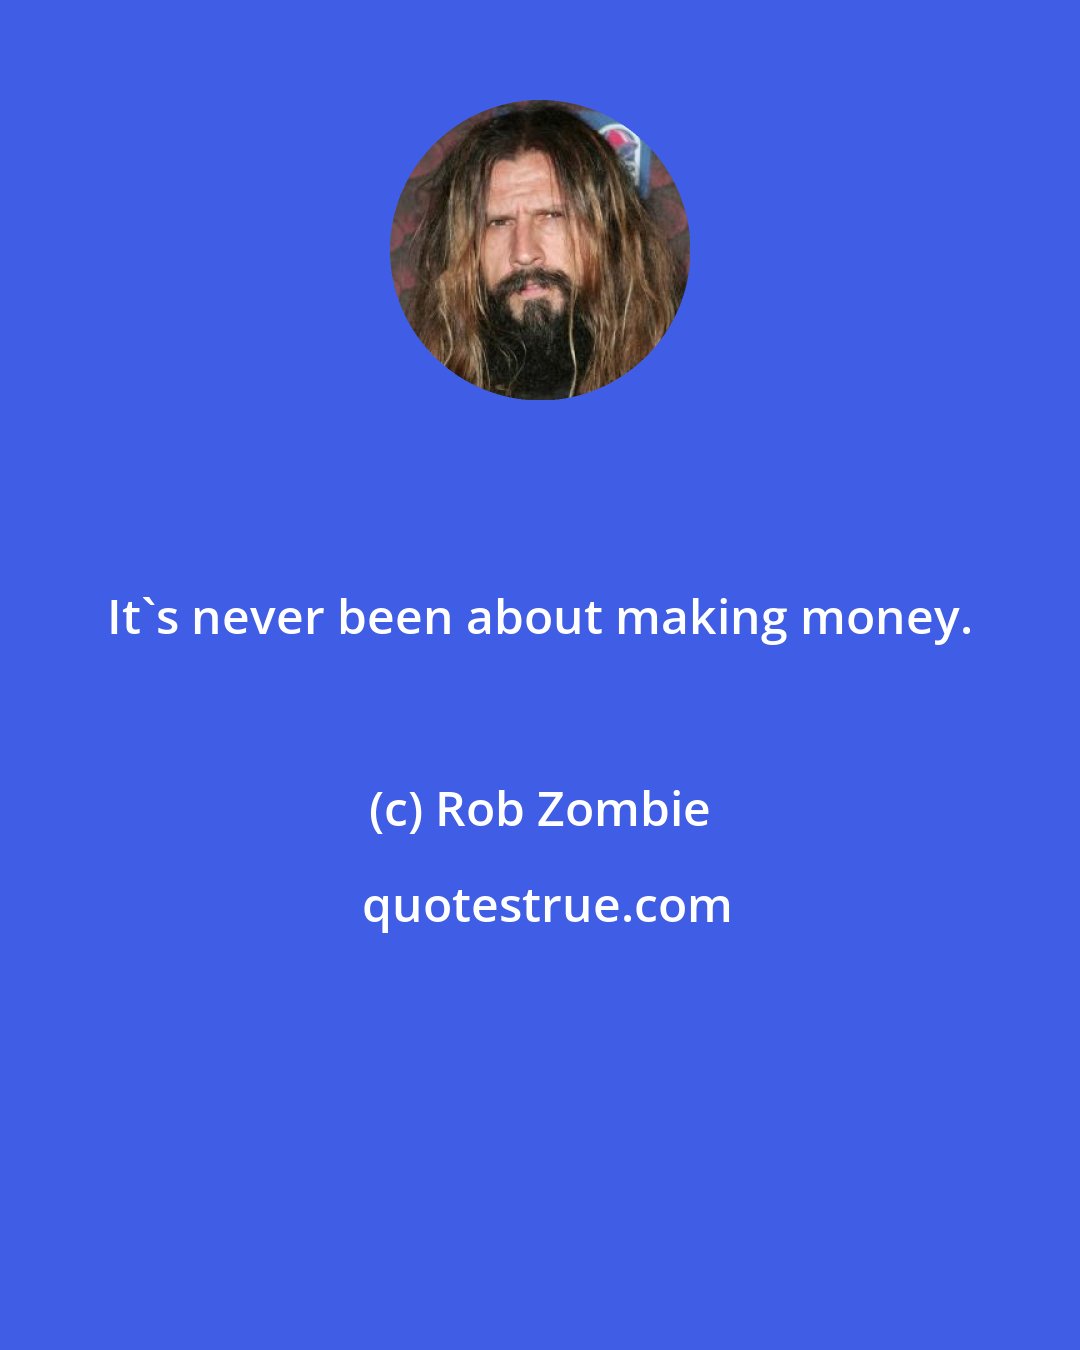 Rob Zombie: It's never been about making money.